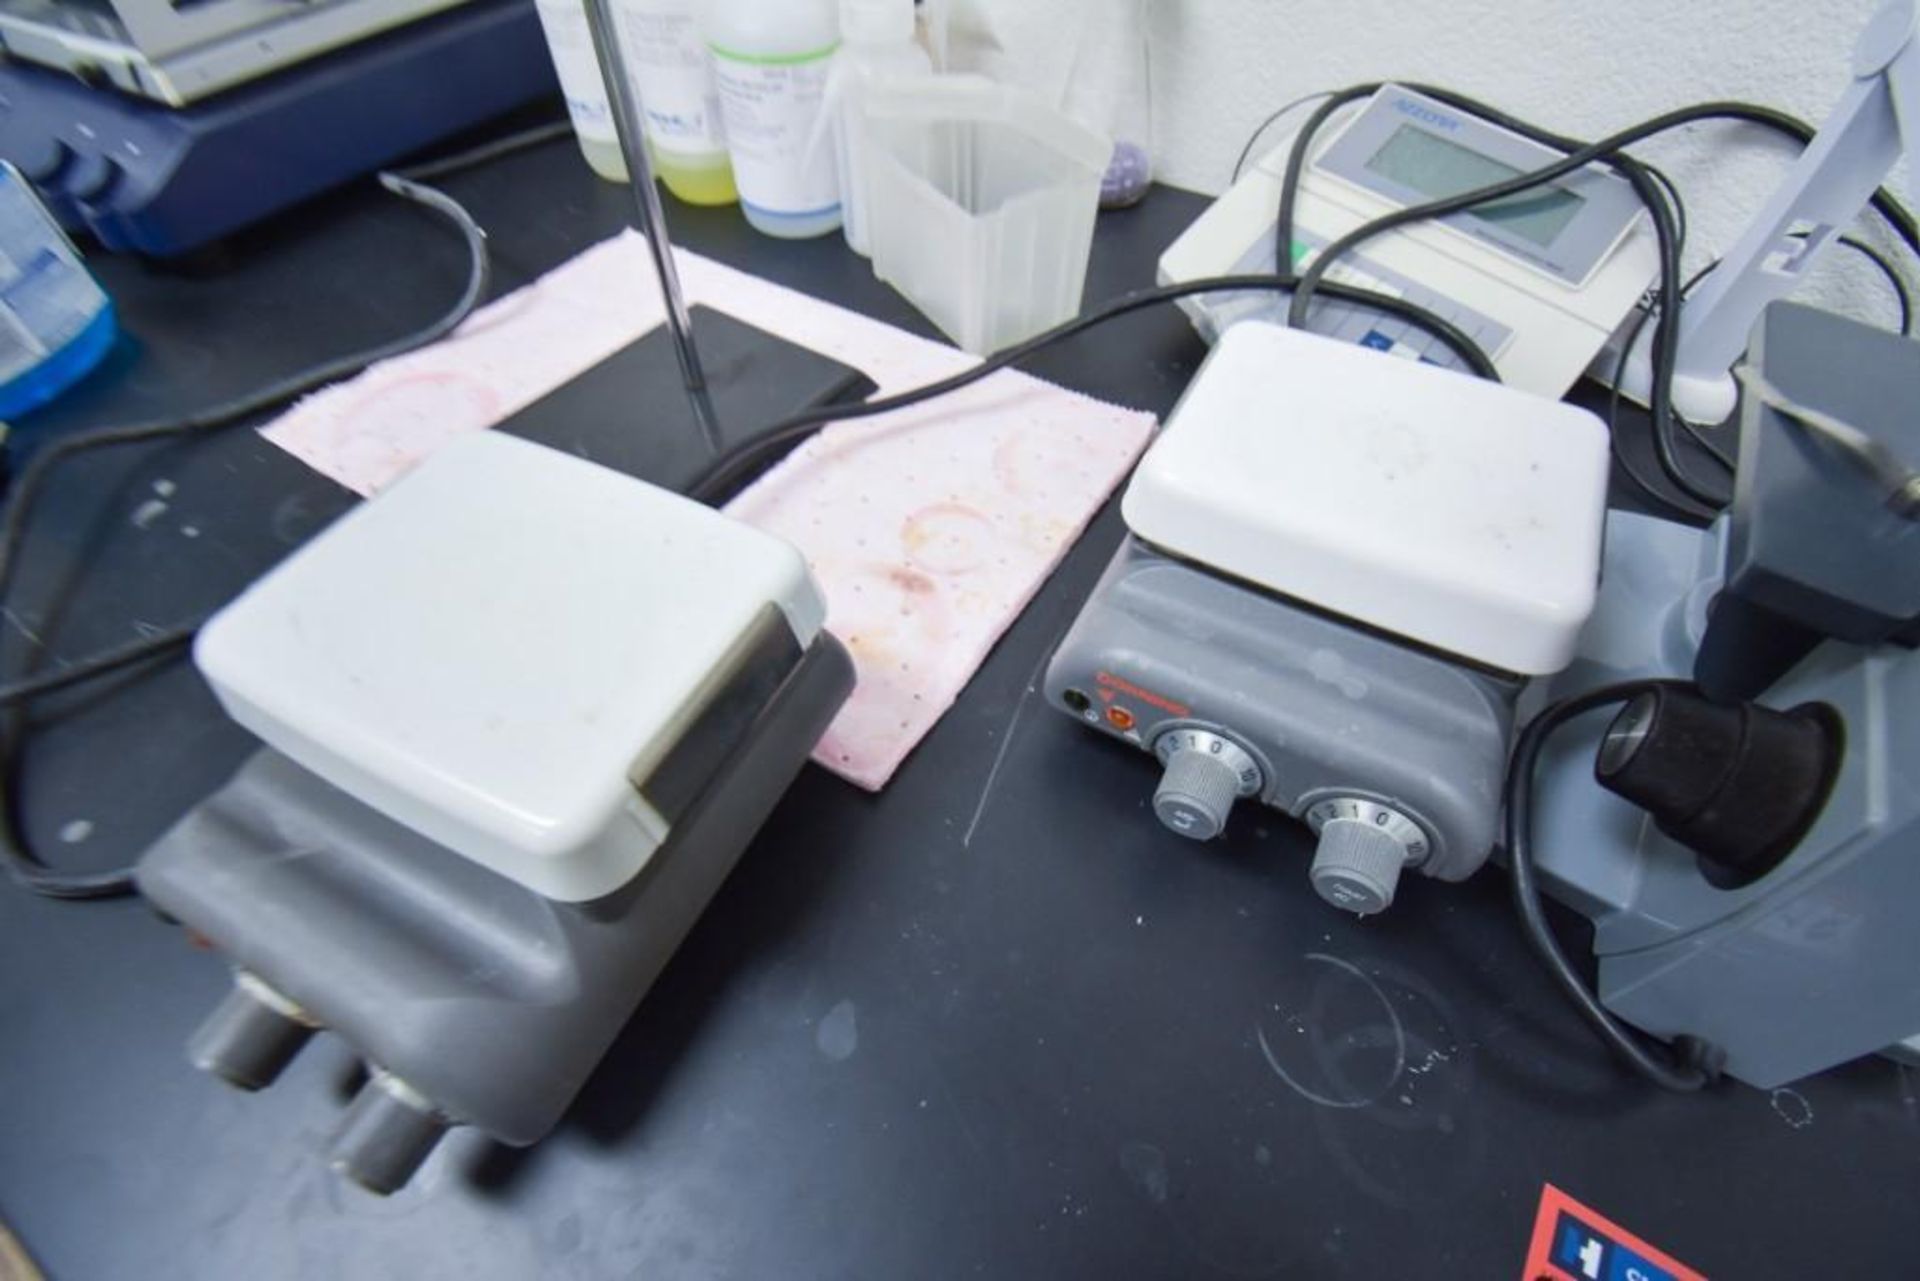 American Optical "One Sixty" Microscope and Magnetic Heat Stirrer - Image 2 of 5